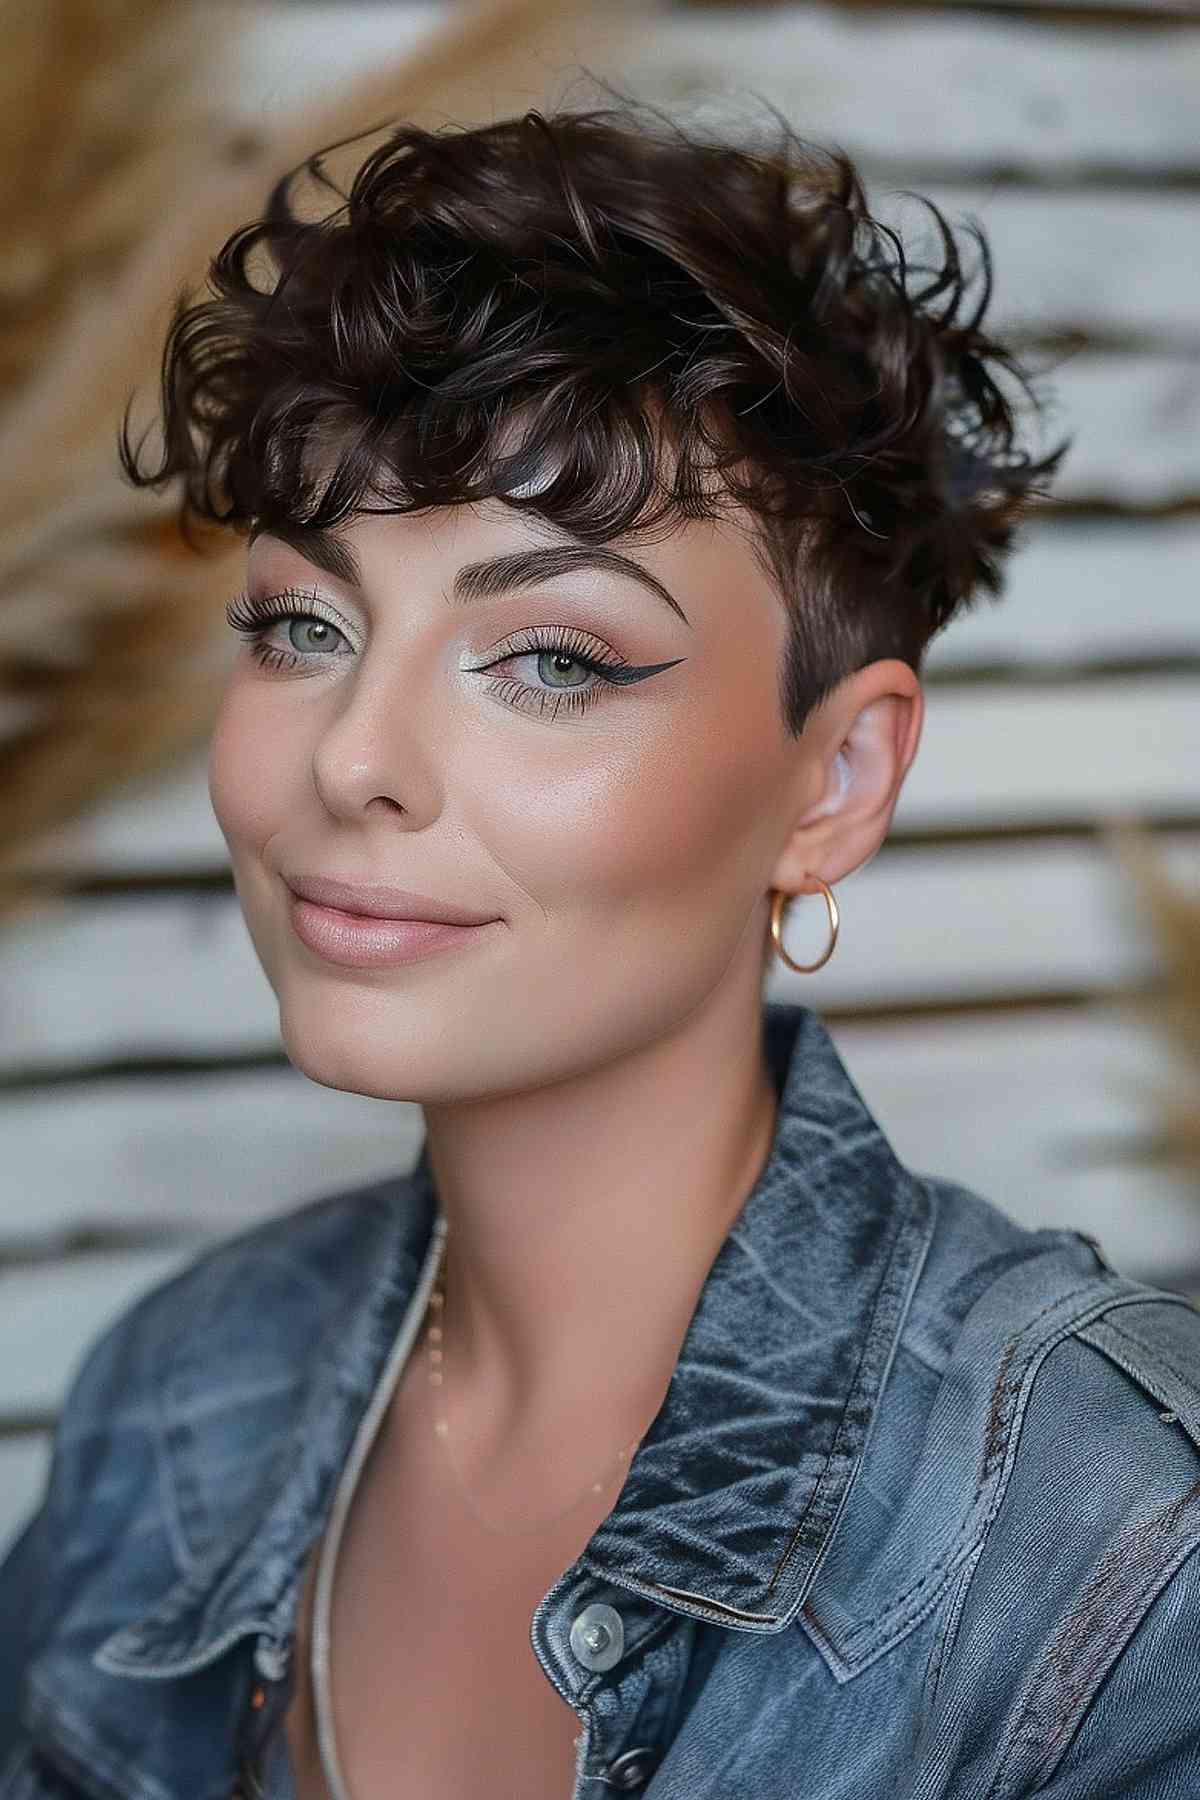 Woman with a feathered pixie cut showcasing natural curls and volume, paired with a denim jacket for a casual, stylish look.